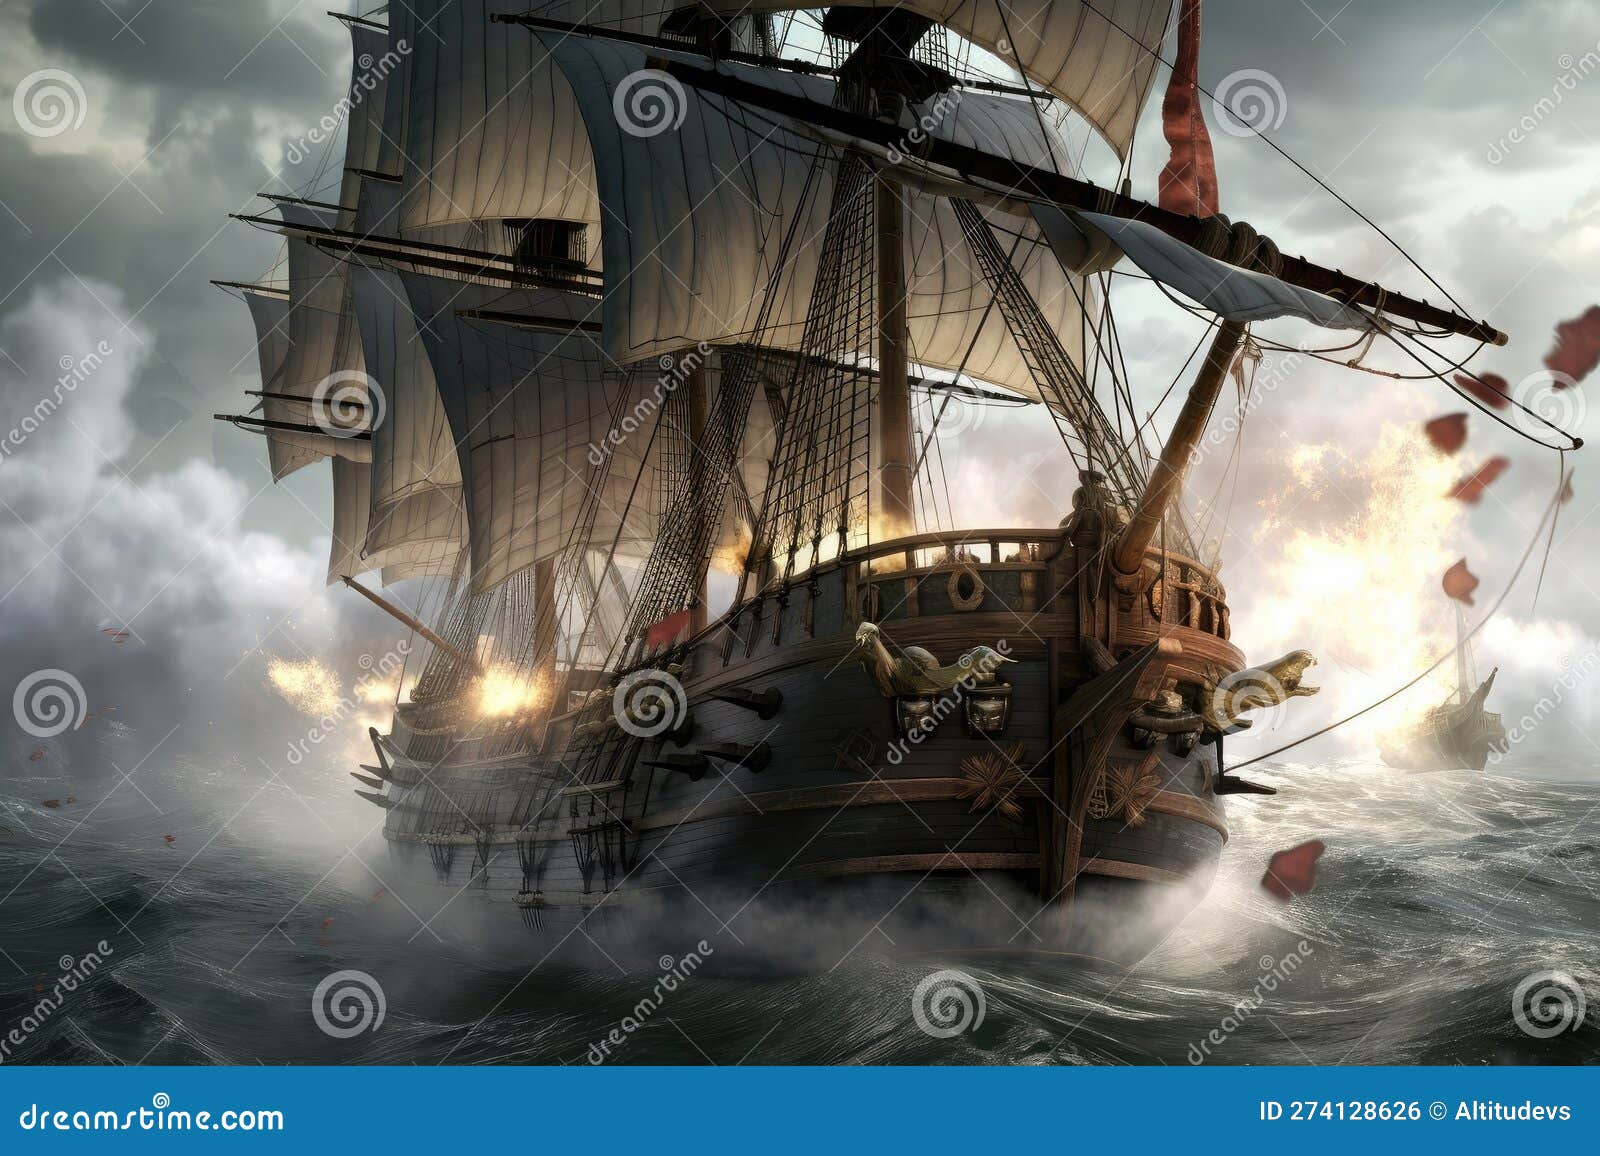 Pirate Ship In Battle, With Cannons Firing And Smoke Rising Stock ...